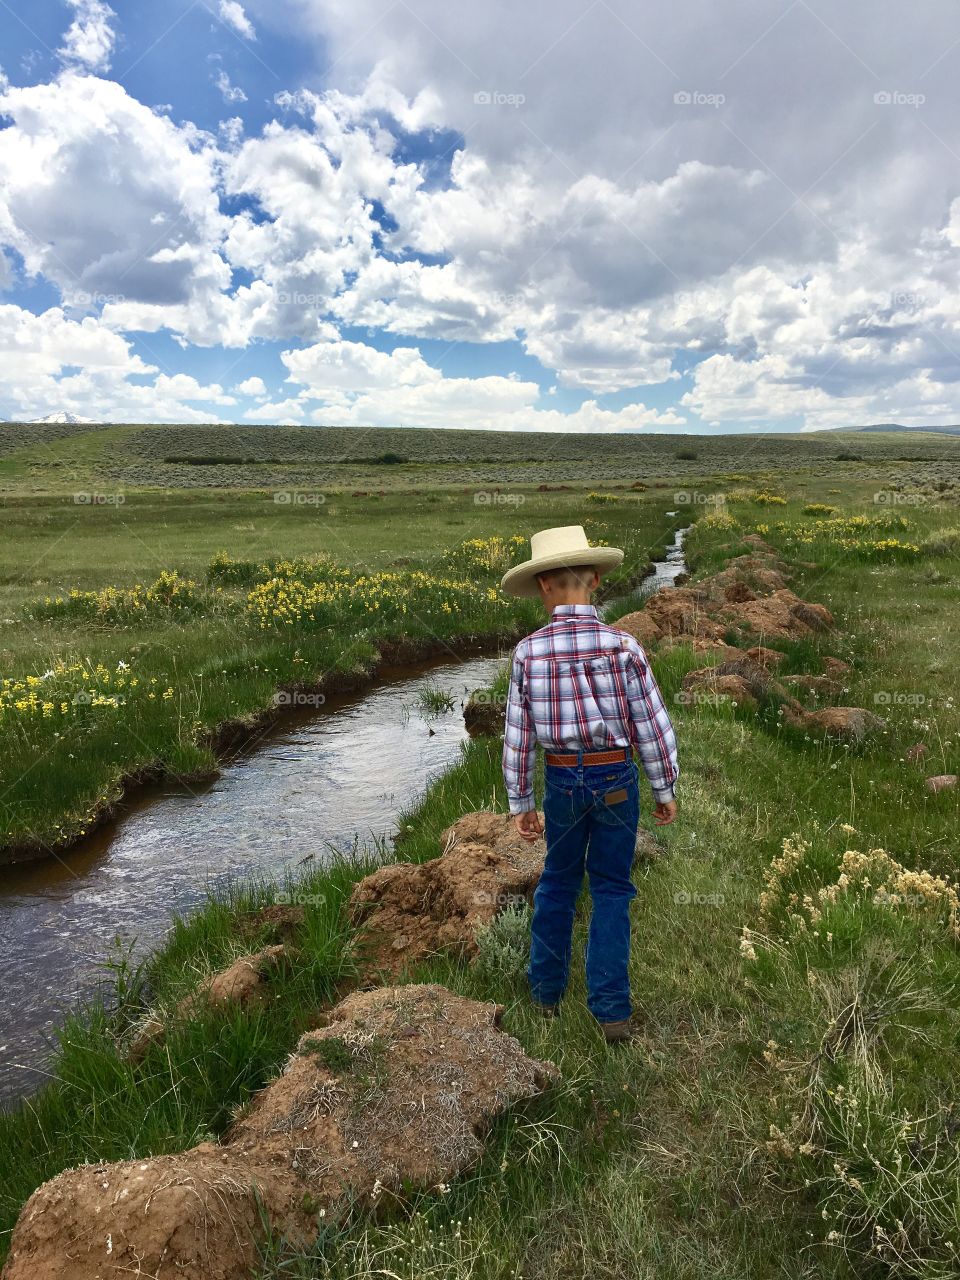 Little cowboy in the big wide country. Cowboy hat, belt and boots. Country life. Blue skies, slow beautiful steams and wide open fields of yellow wild flowers. Just a boy in the country.